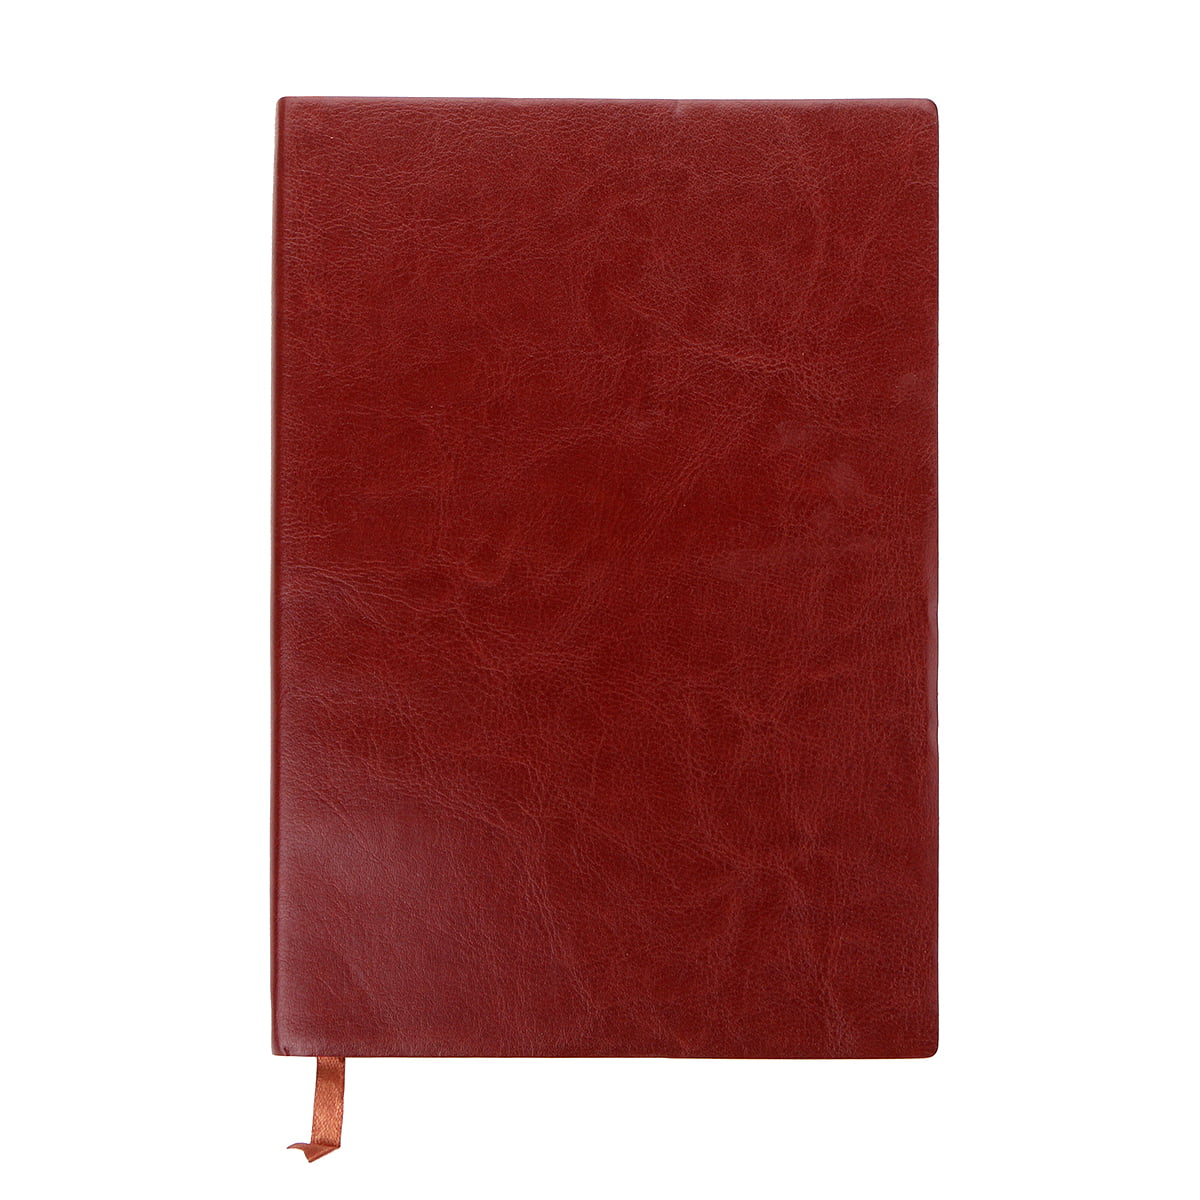 1pcs Soft Cover PU Leather Notebook Writing Journal 100 Page Diary Book For Offi 